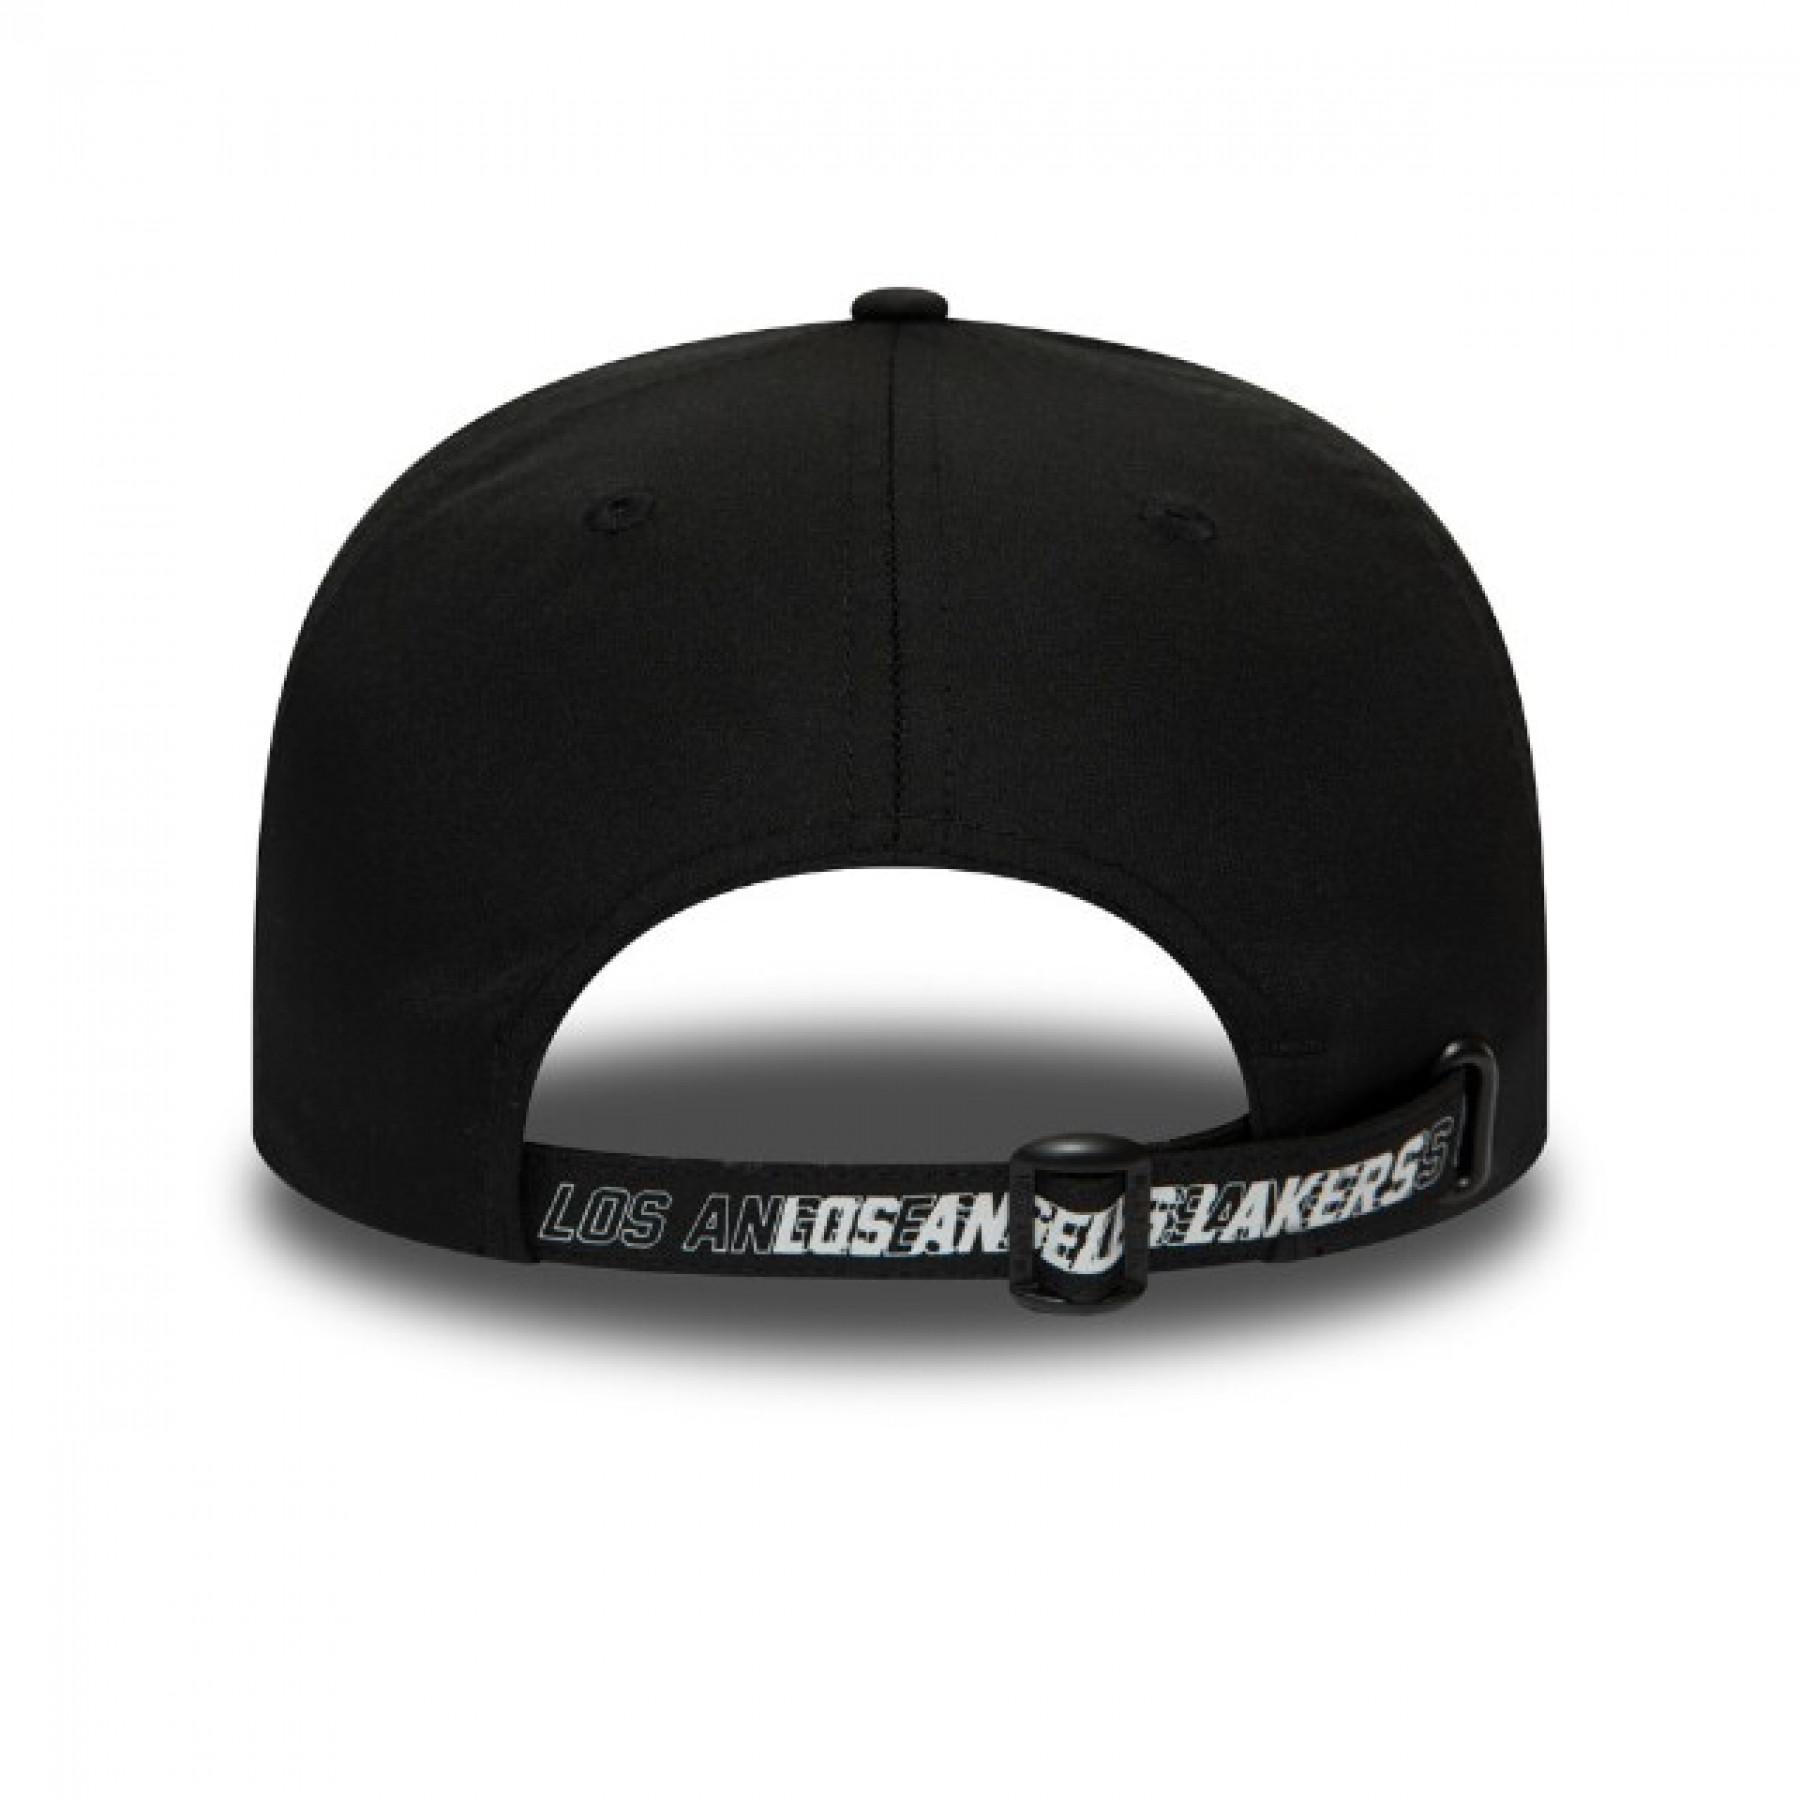 Casquette New Era Lakers Nba 9fifty